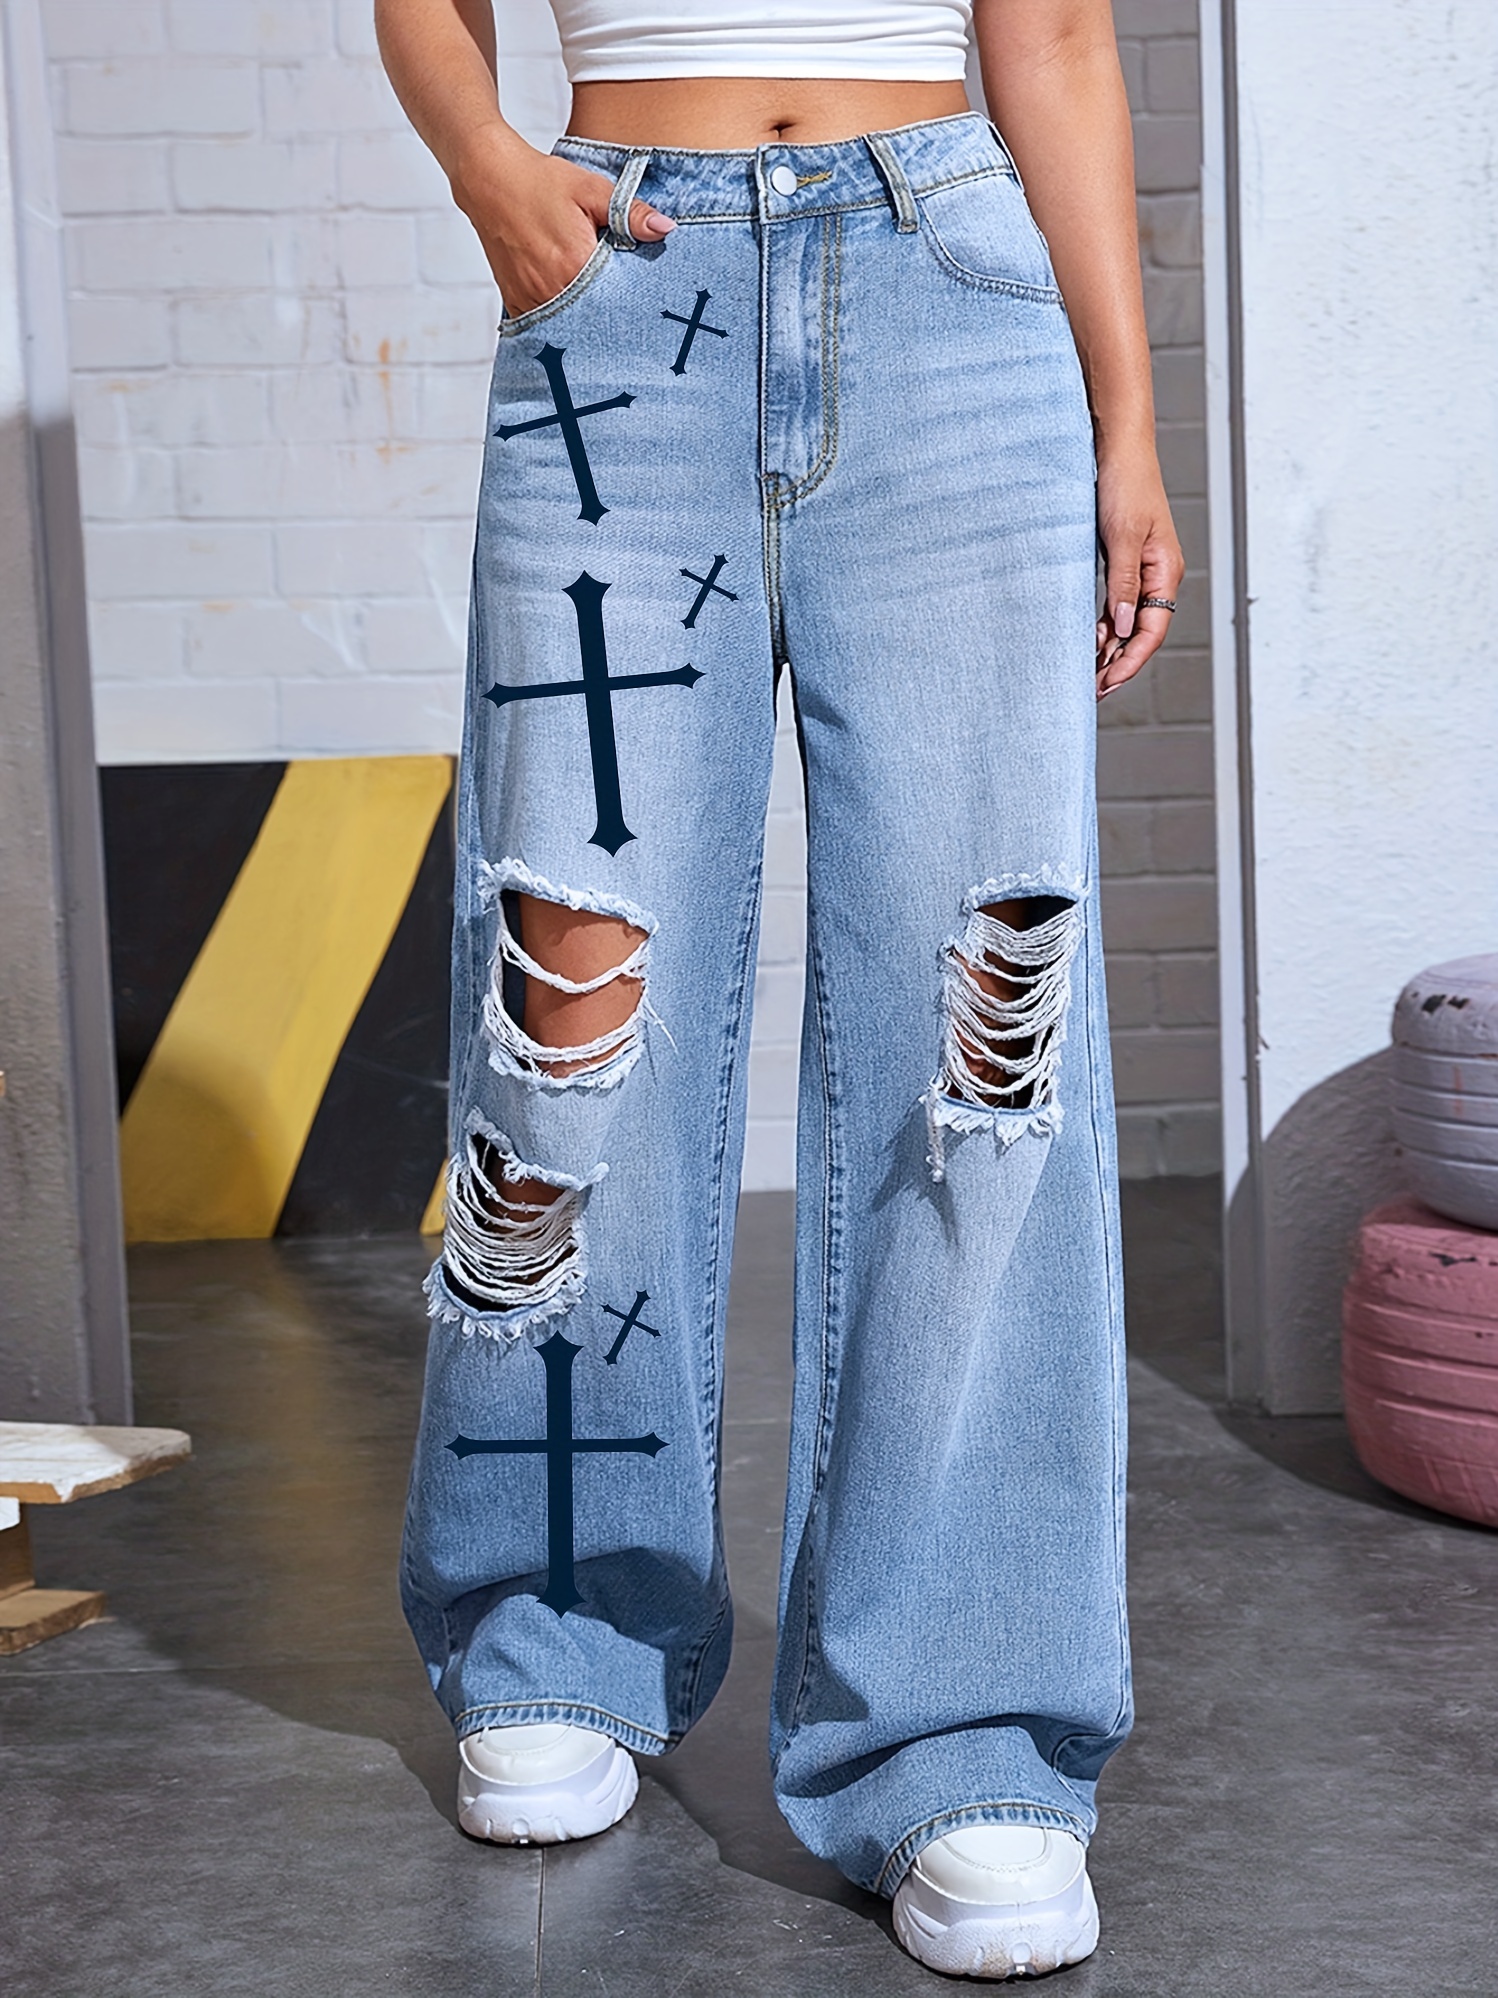 Blue Cross Print Baggy Jeans, Loose Fit Ripped Holes Wide Legs Jeans,  Halloween Women's Denim Jeans & Clothing